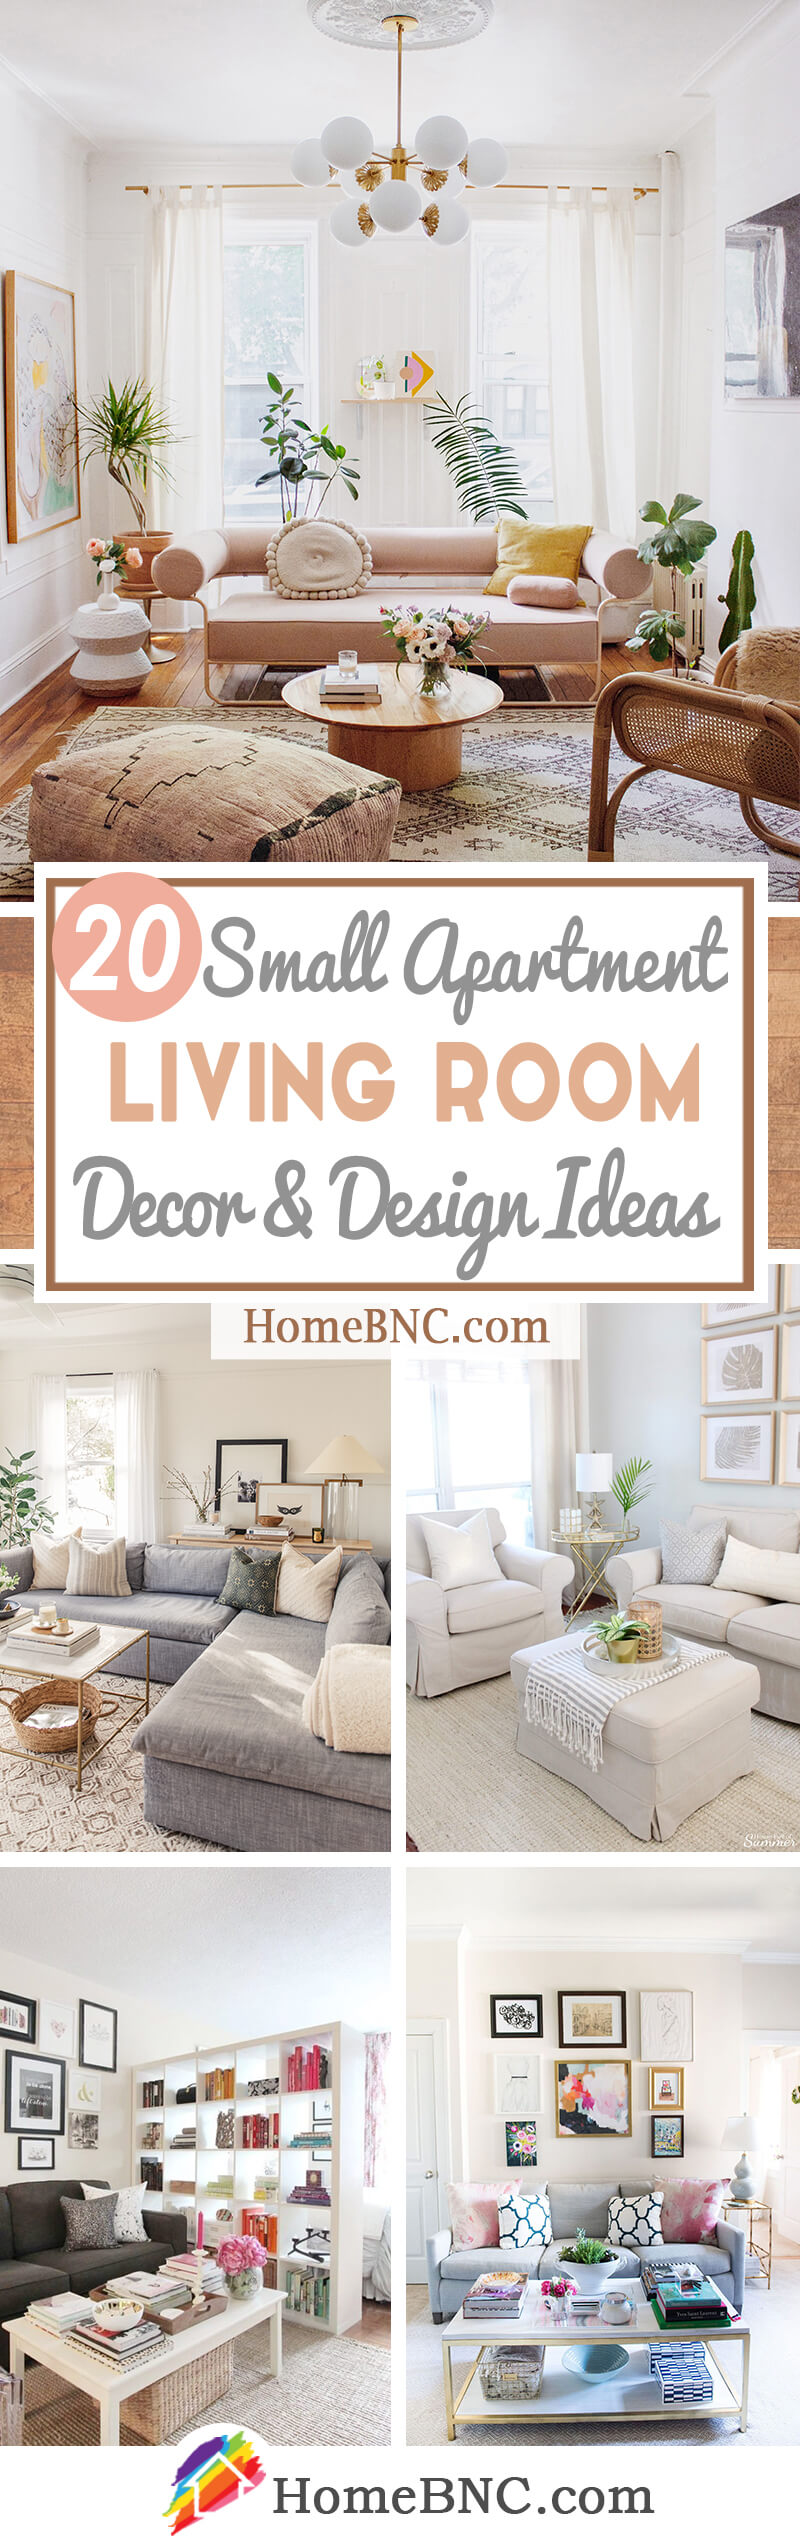 Best Small Apartment Living Room Decor And Design Ideas For 21